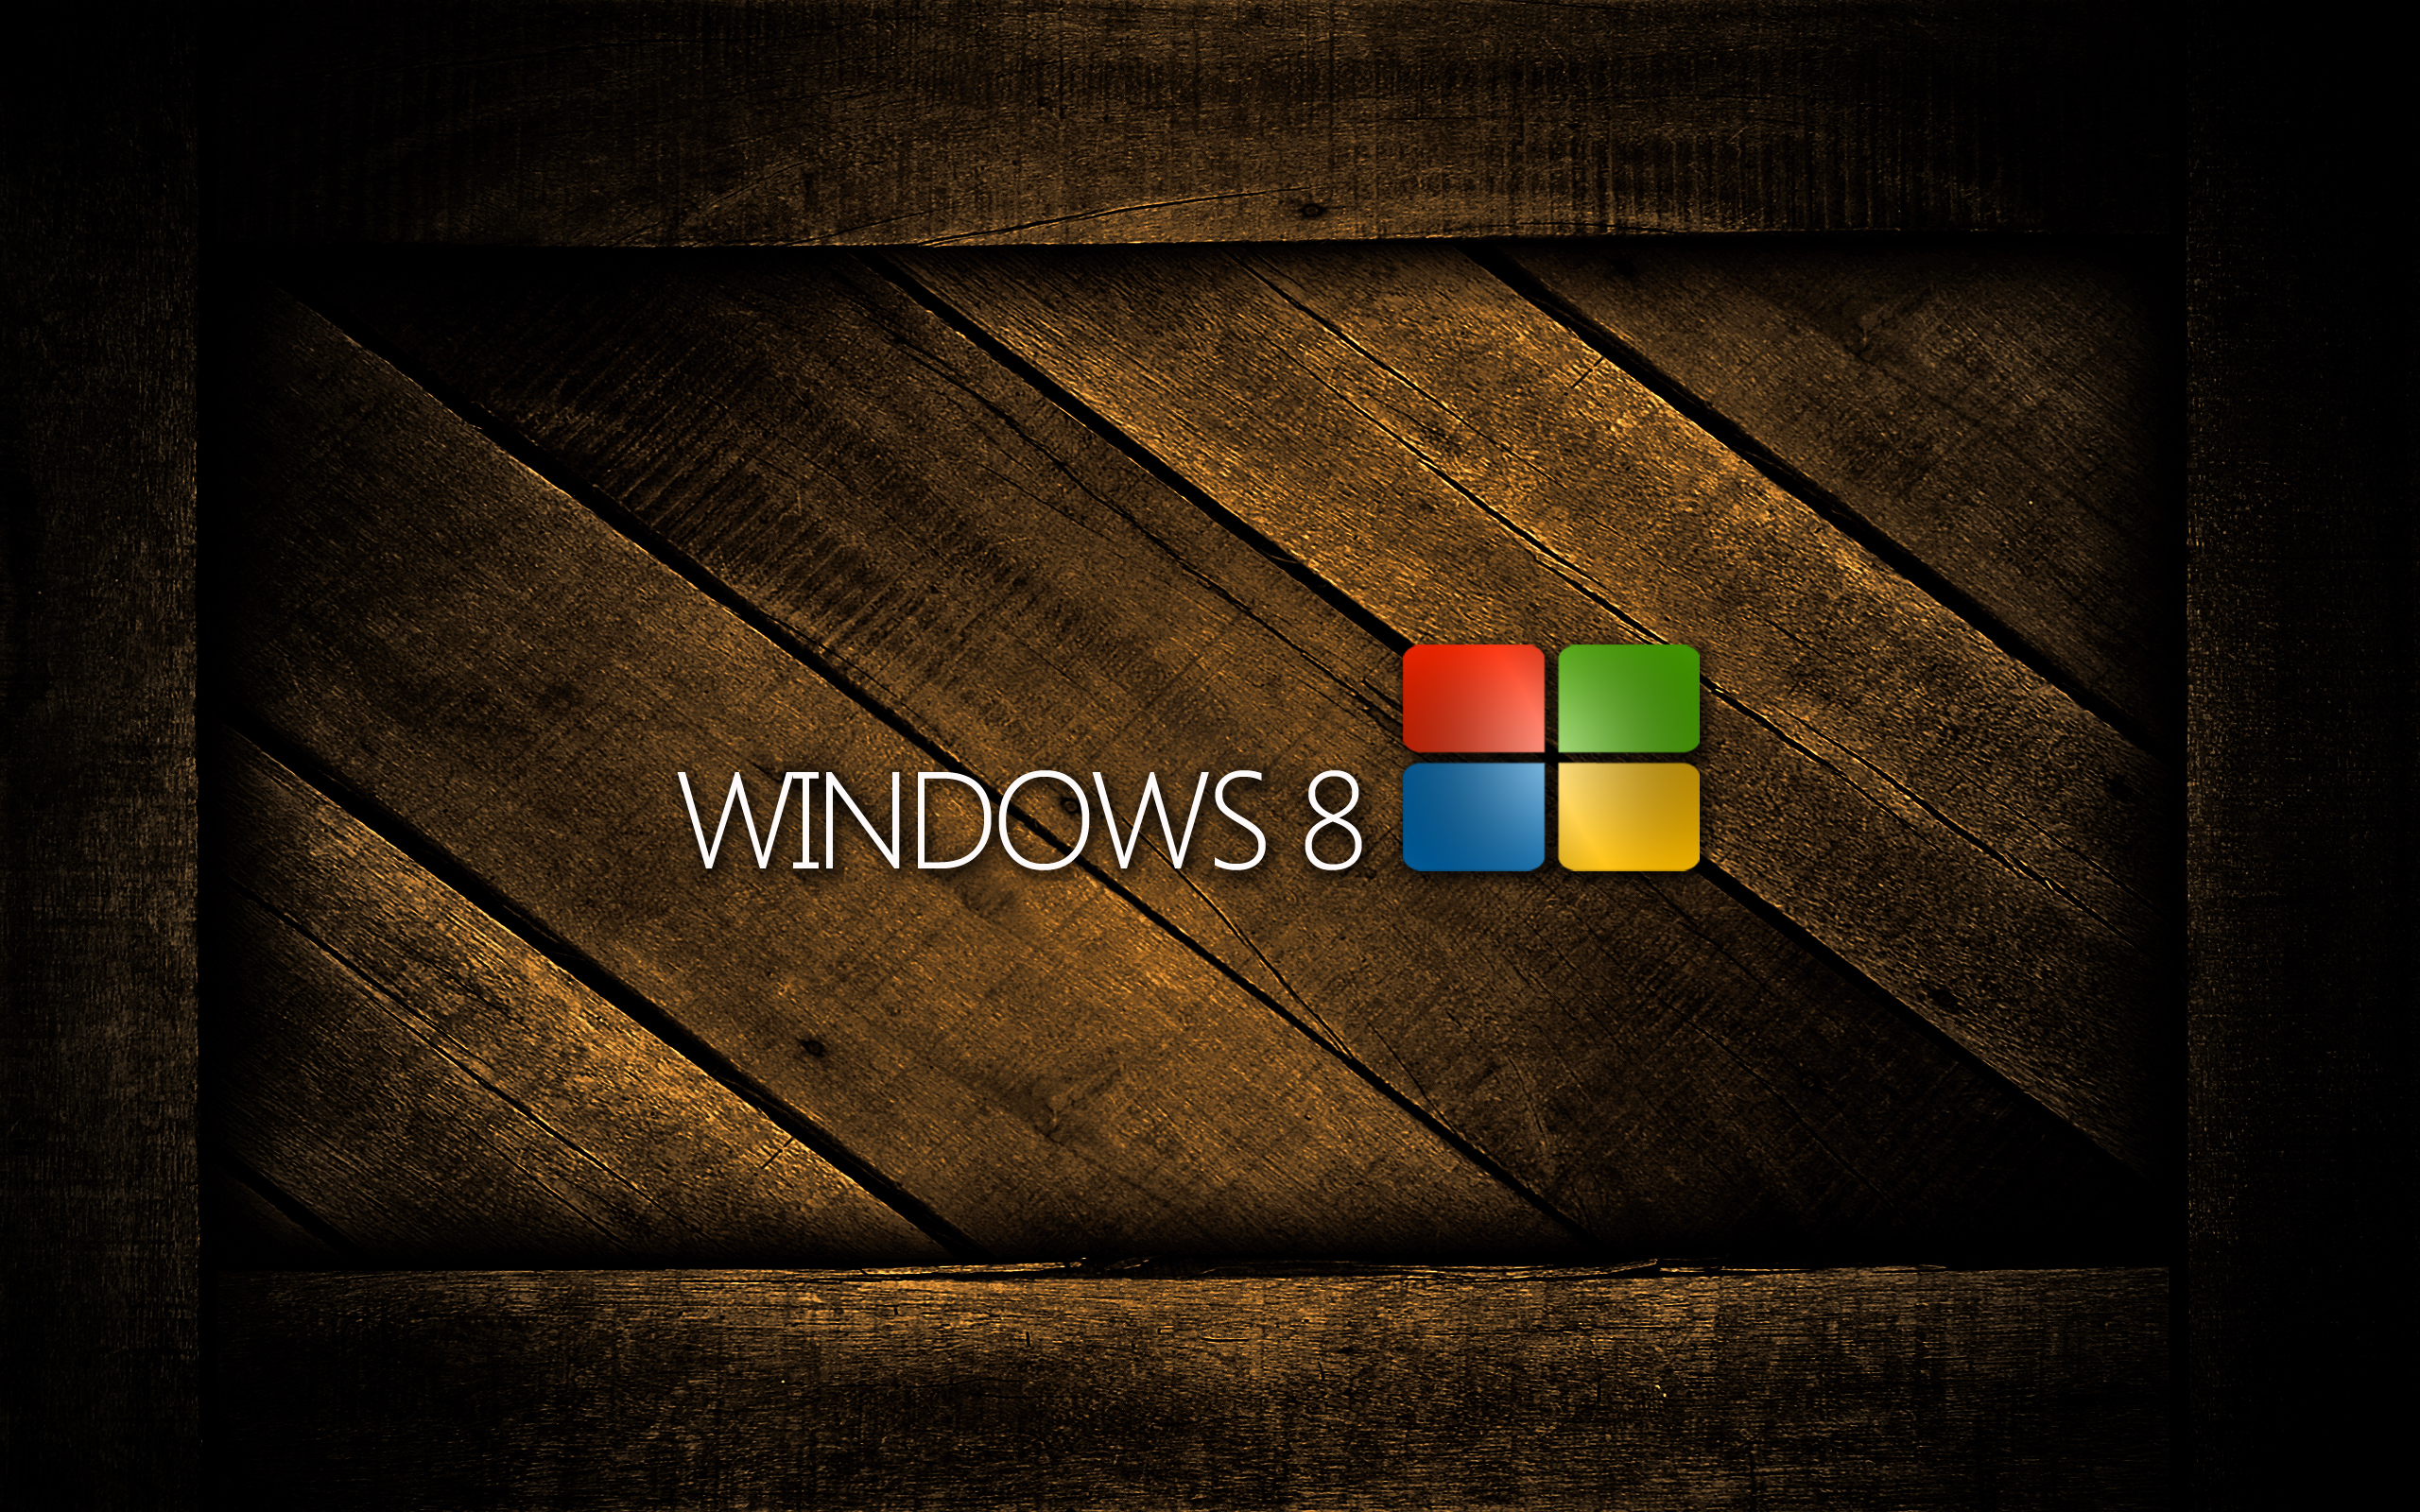 HD Wallpapers for Windows 8 | Wallpapers, Backgrounds, Images, Art ...